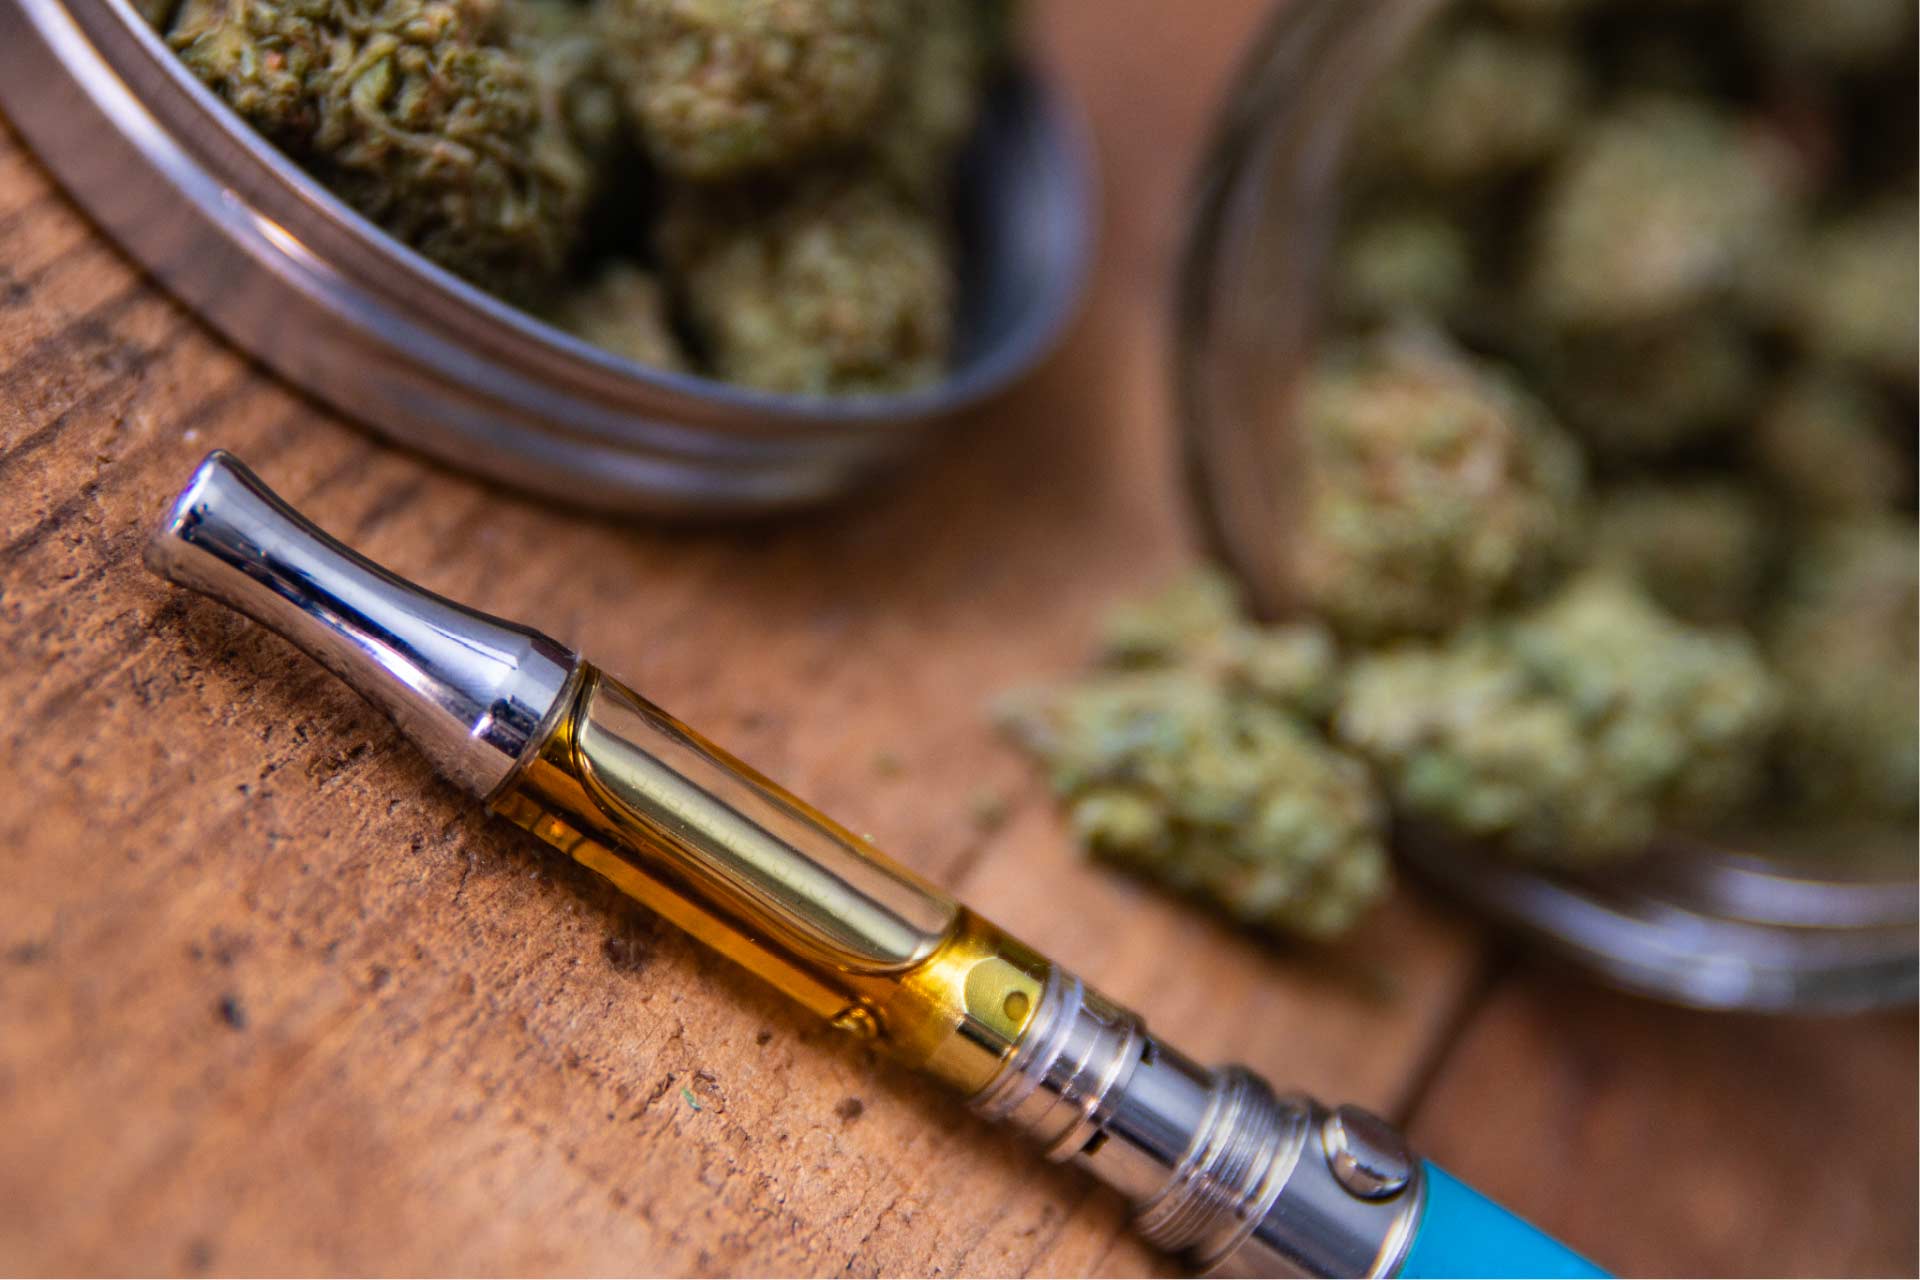 Cannabis vape and cannabis flower, two effective forms of cannabis medicine.